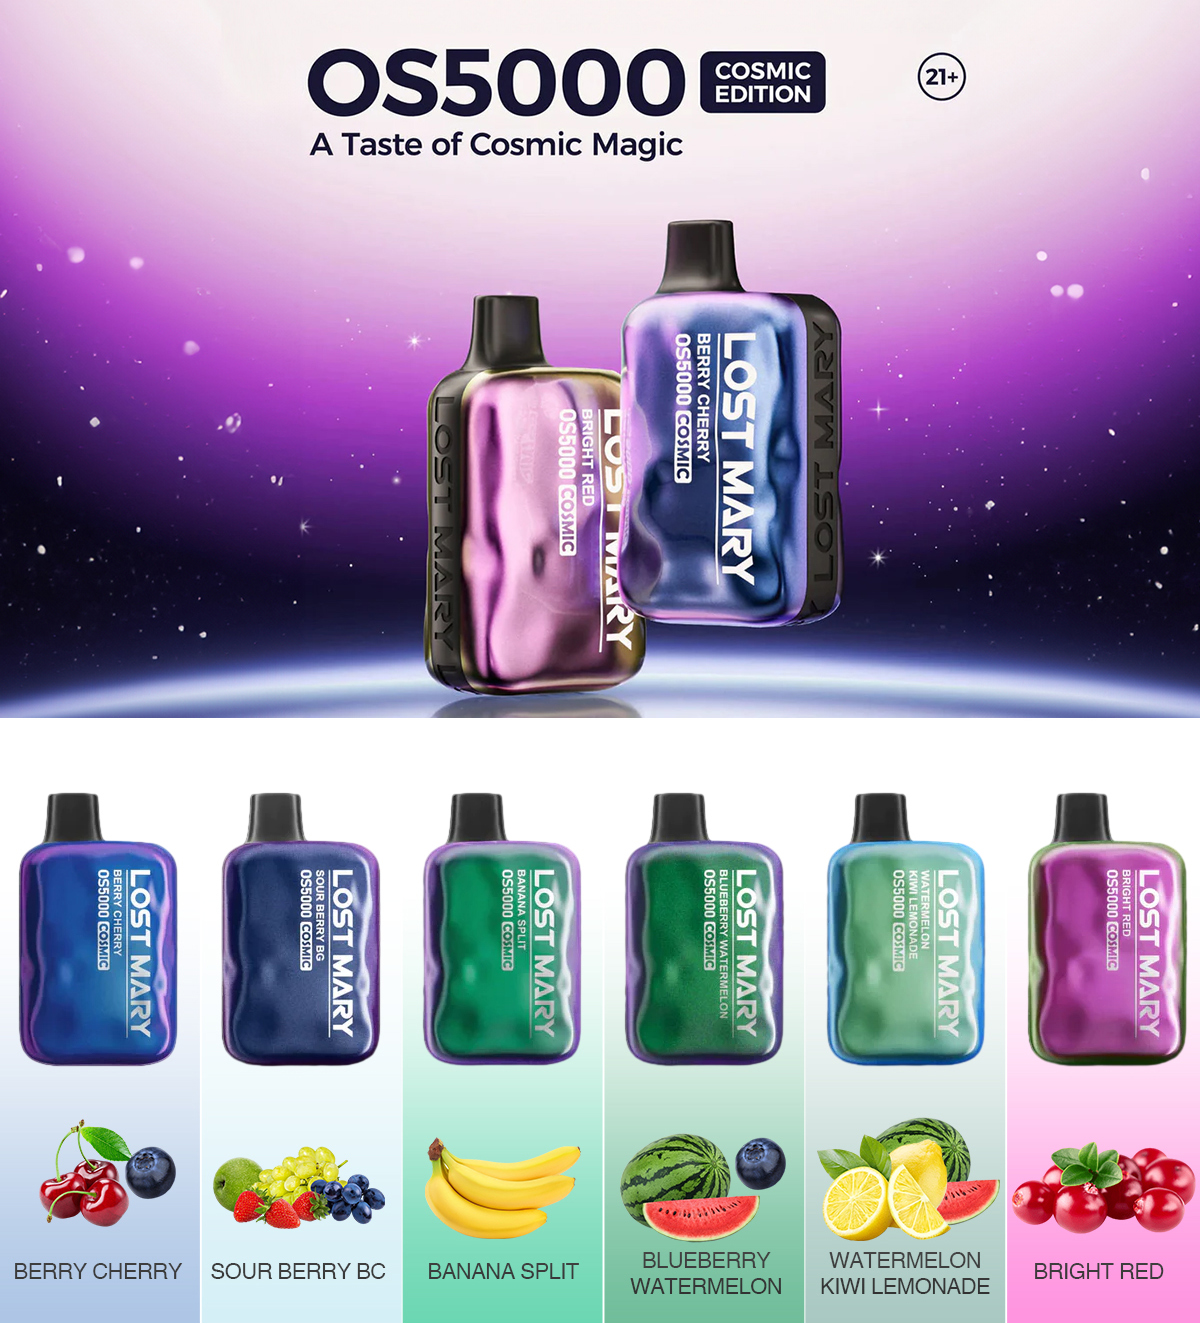 Lost OS5000 Cosmic Edition hot sale